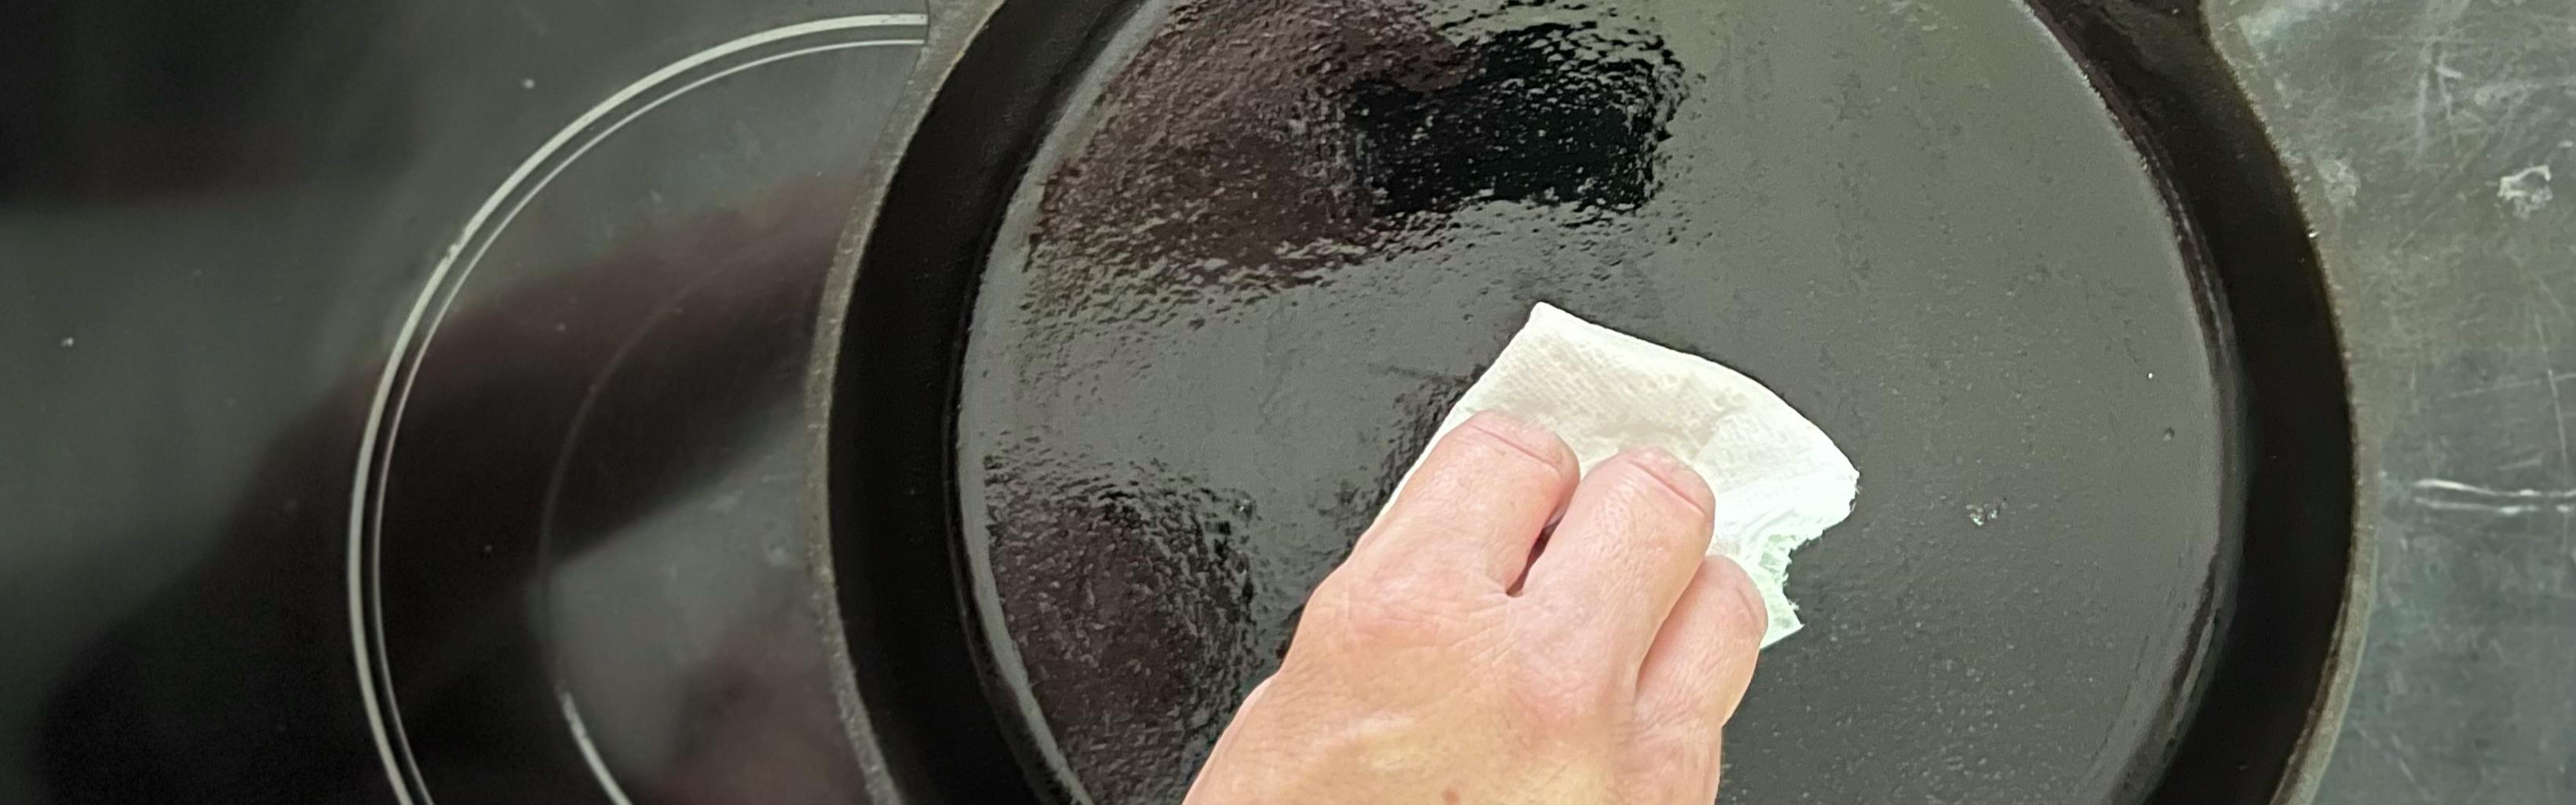 Lodge's Bestselling Scrubbing Pad Pulls 'Crusty Gunk' Off Cast Iron in  'Less Than a Minute